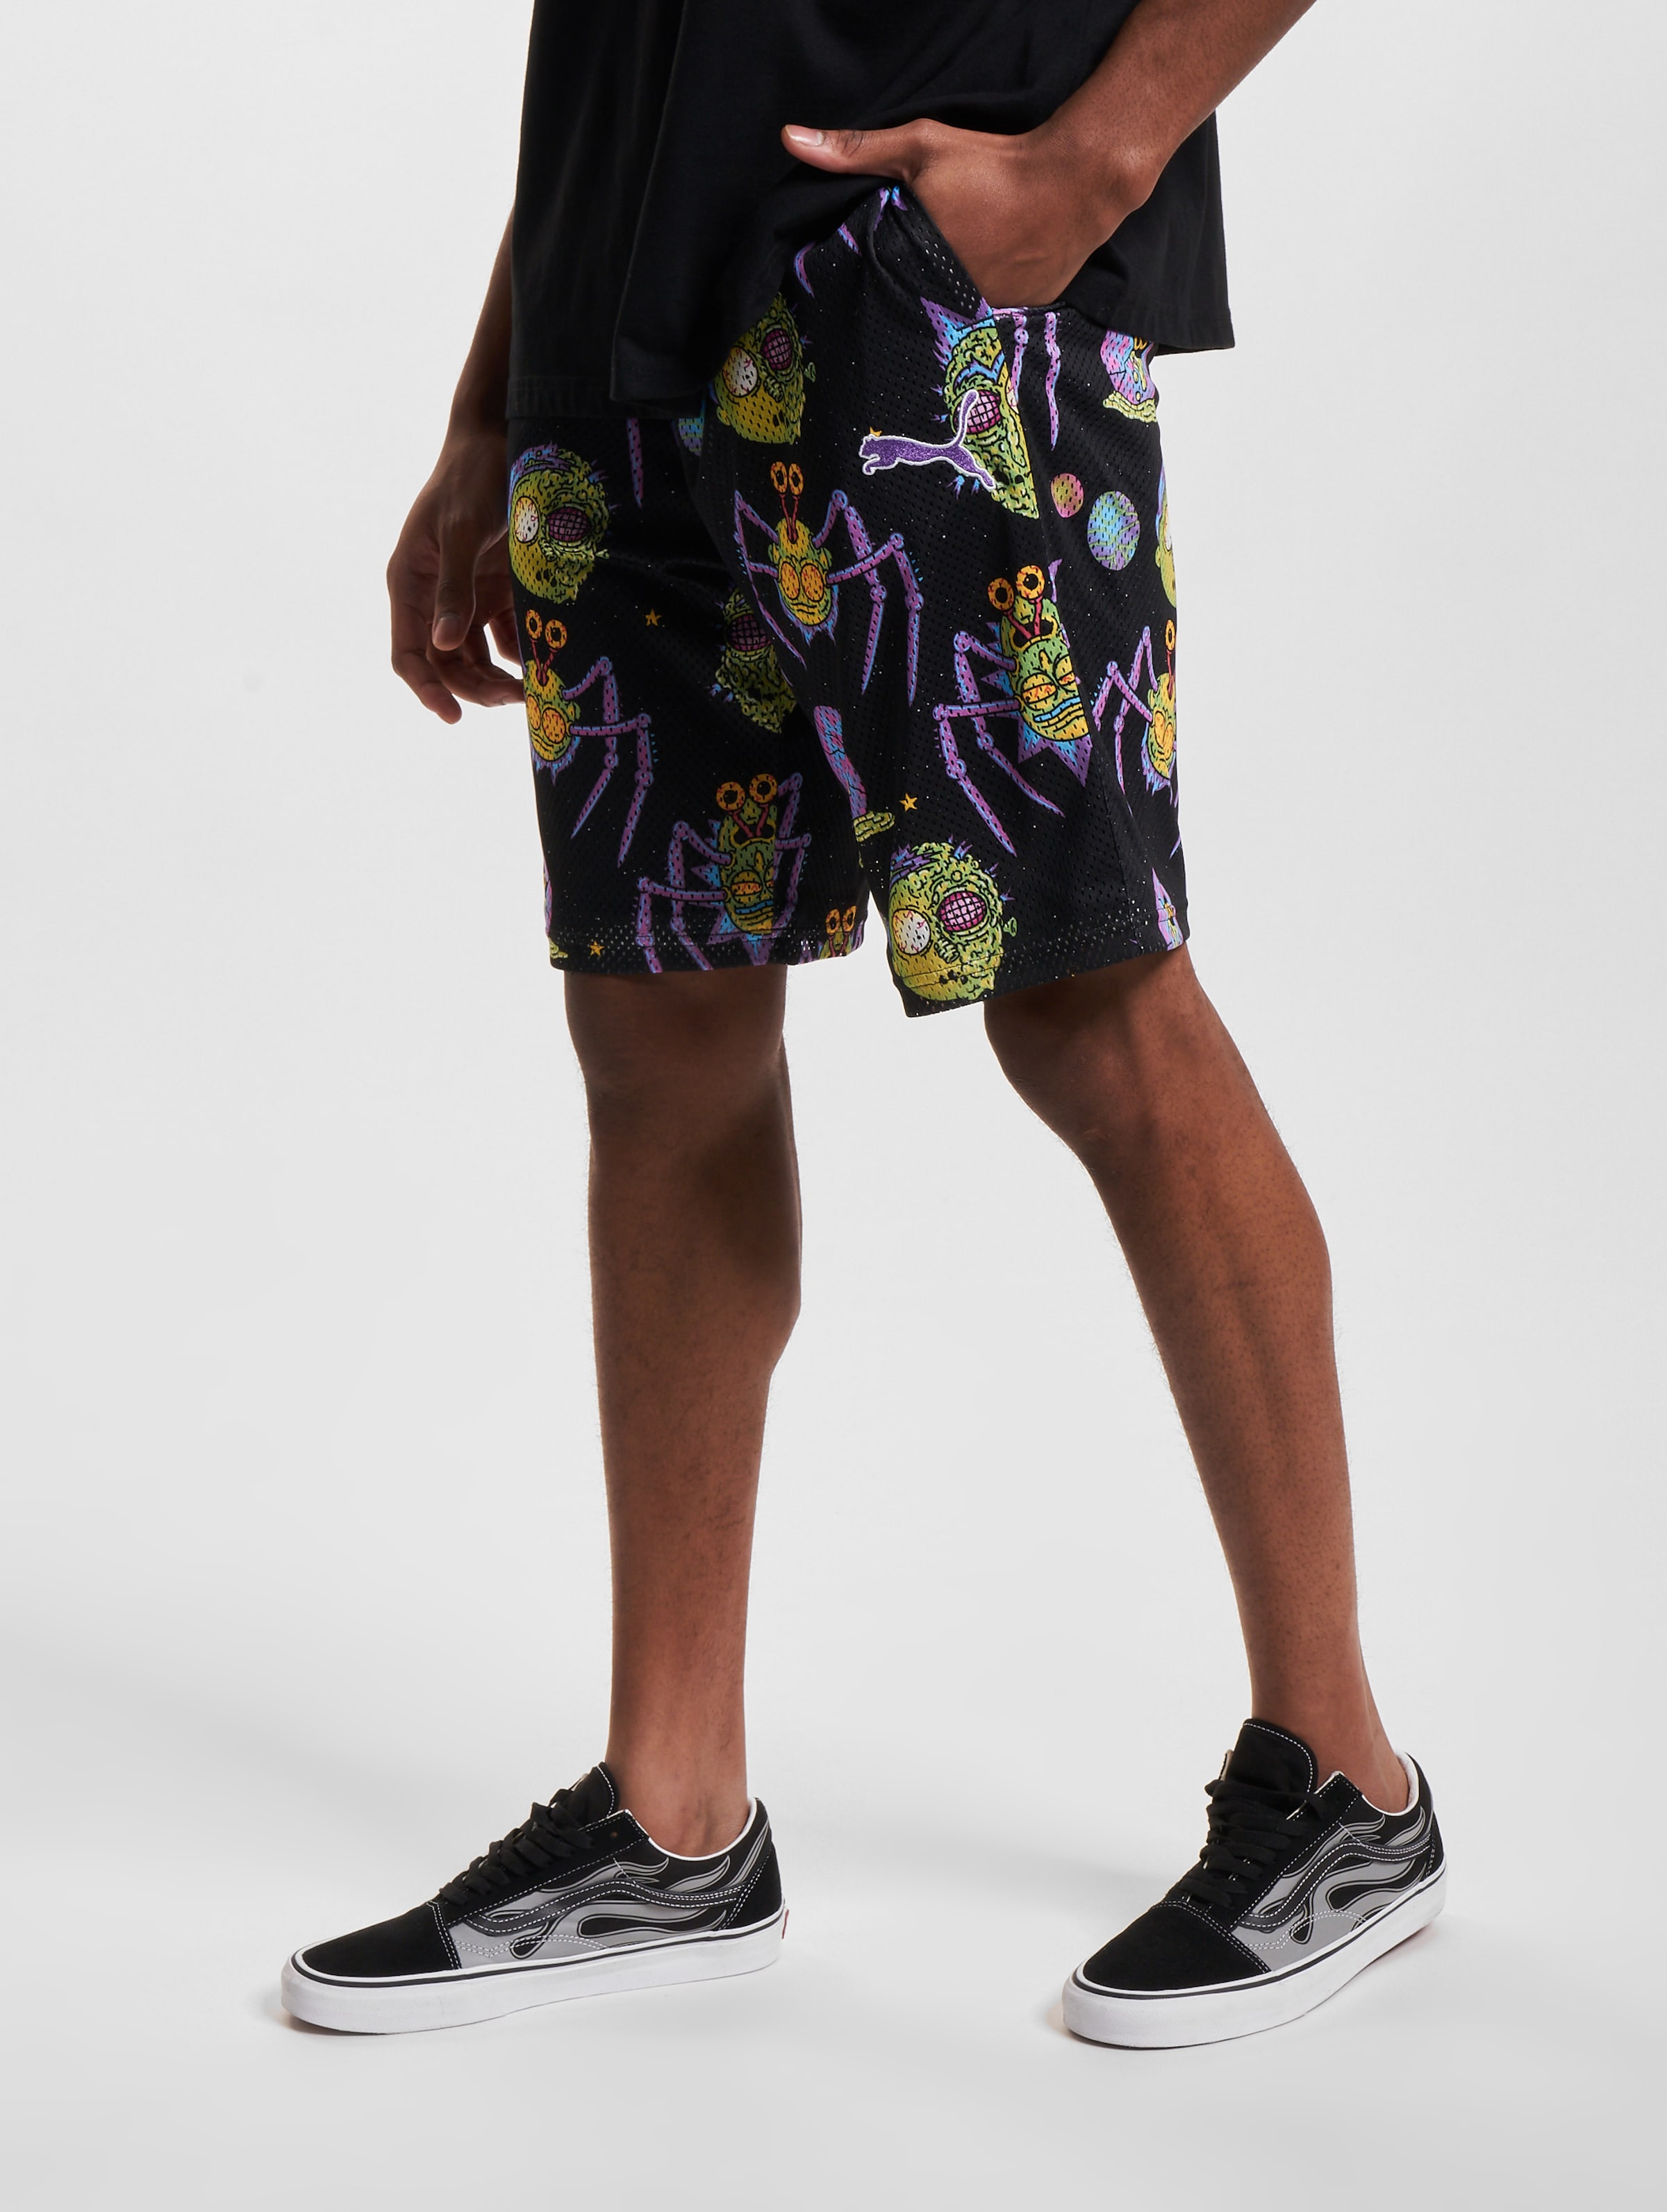 Puma Rick and Morty All over Print Short